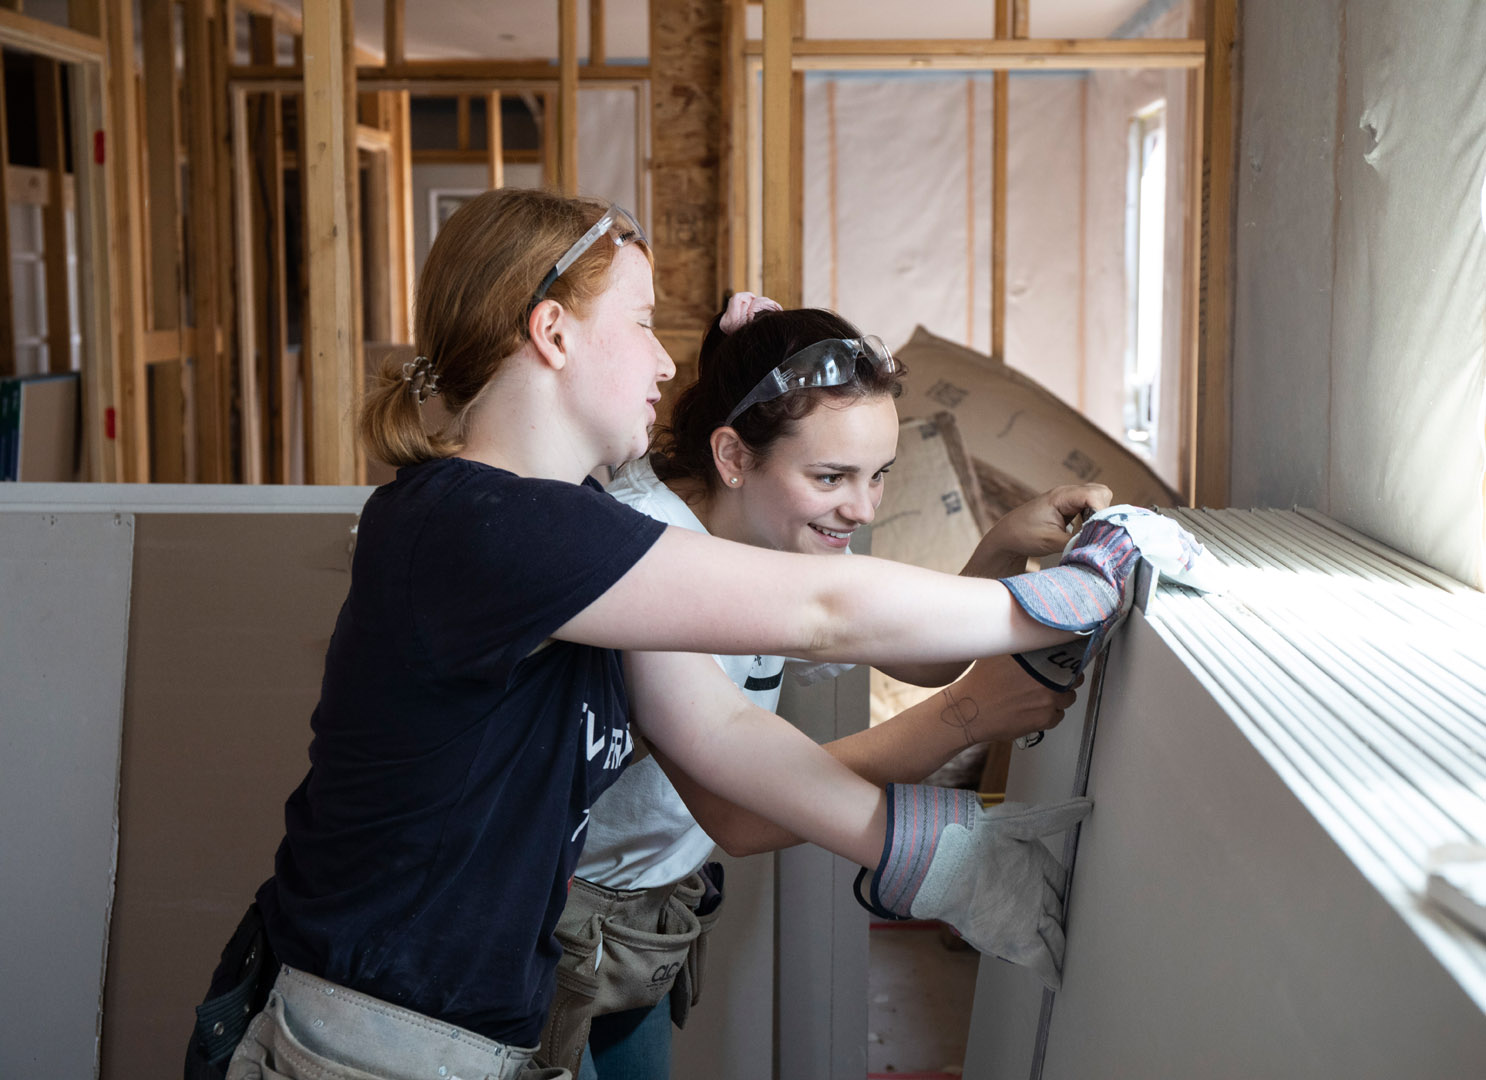 Rabea Friedrich and Meg Westmoreland measure and mark a piece of drywall to cut. For their Priddy Trip experience, freshmen traveled to Santa Fe, New Mexico where they worked with Habitat For Humanity putting up drywall for homes that will eventually be turned over to recipients. Photo by Jennifer Coombes